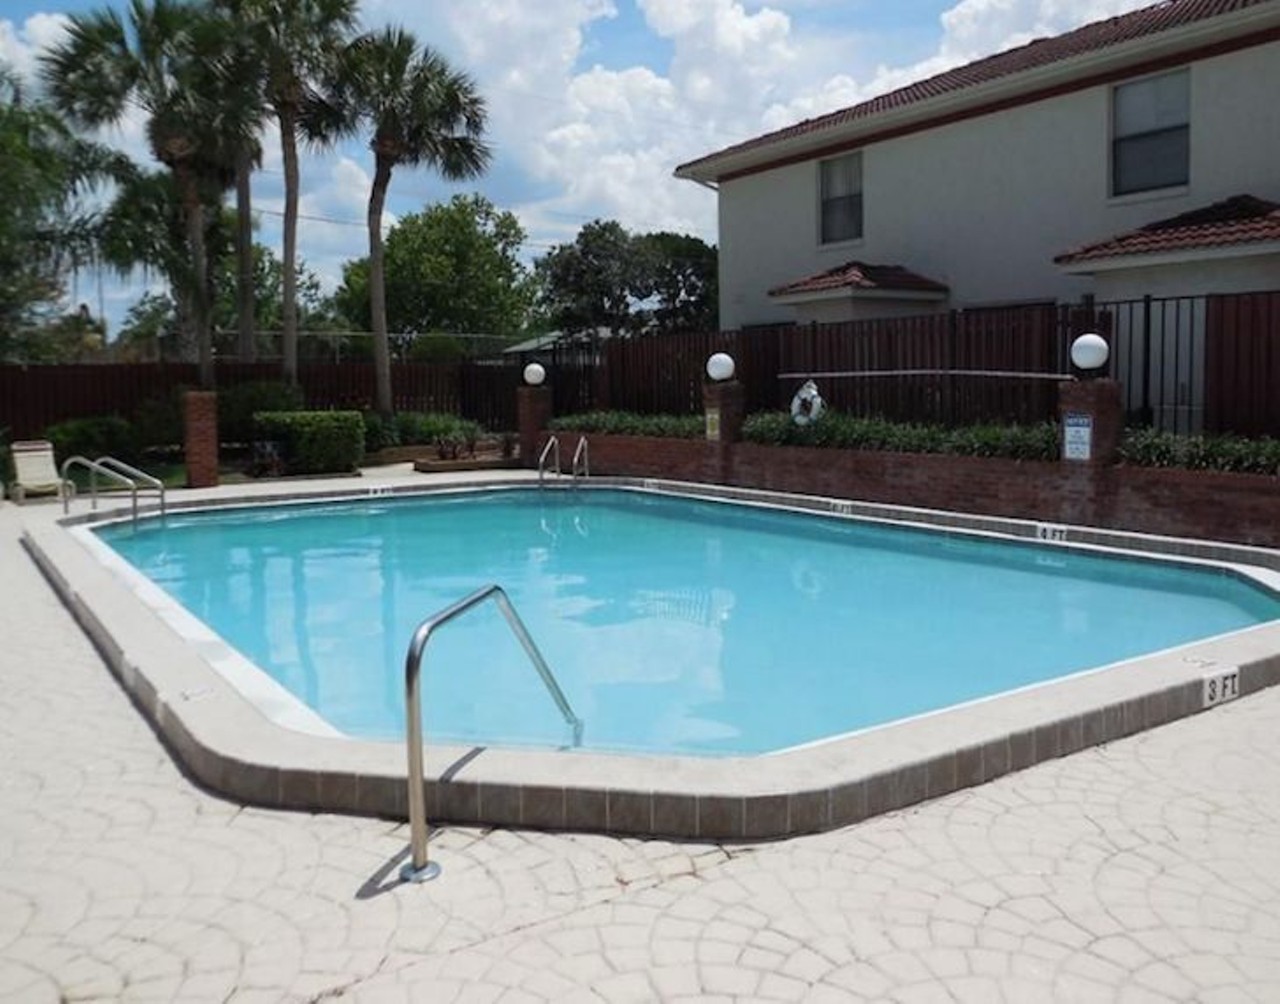 6229 Yorktown Dr, Orlando
$1,200/mo
2 bed, 2.5 bath, 1,227 sqft
This two story townhouse in Avalon Park has recently been renovated and is in its own gated community. There is a giant cabana area near the pool is perfect for grilling out or just enjoying the sun with a few cold brews.